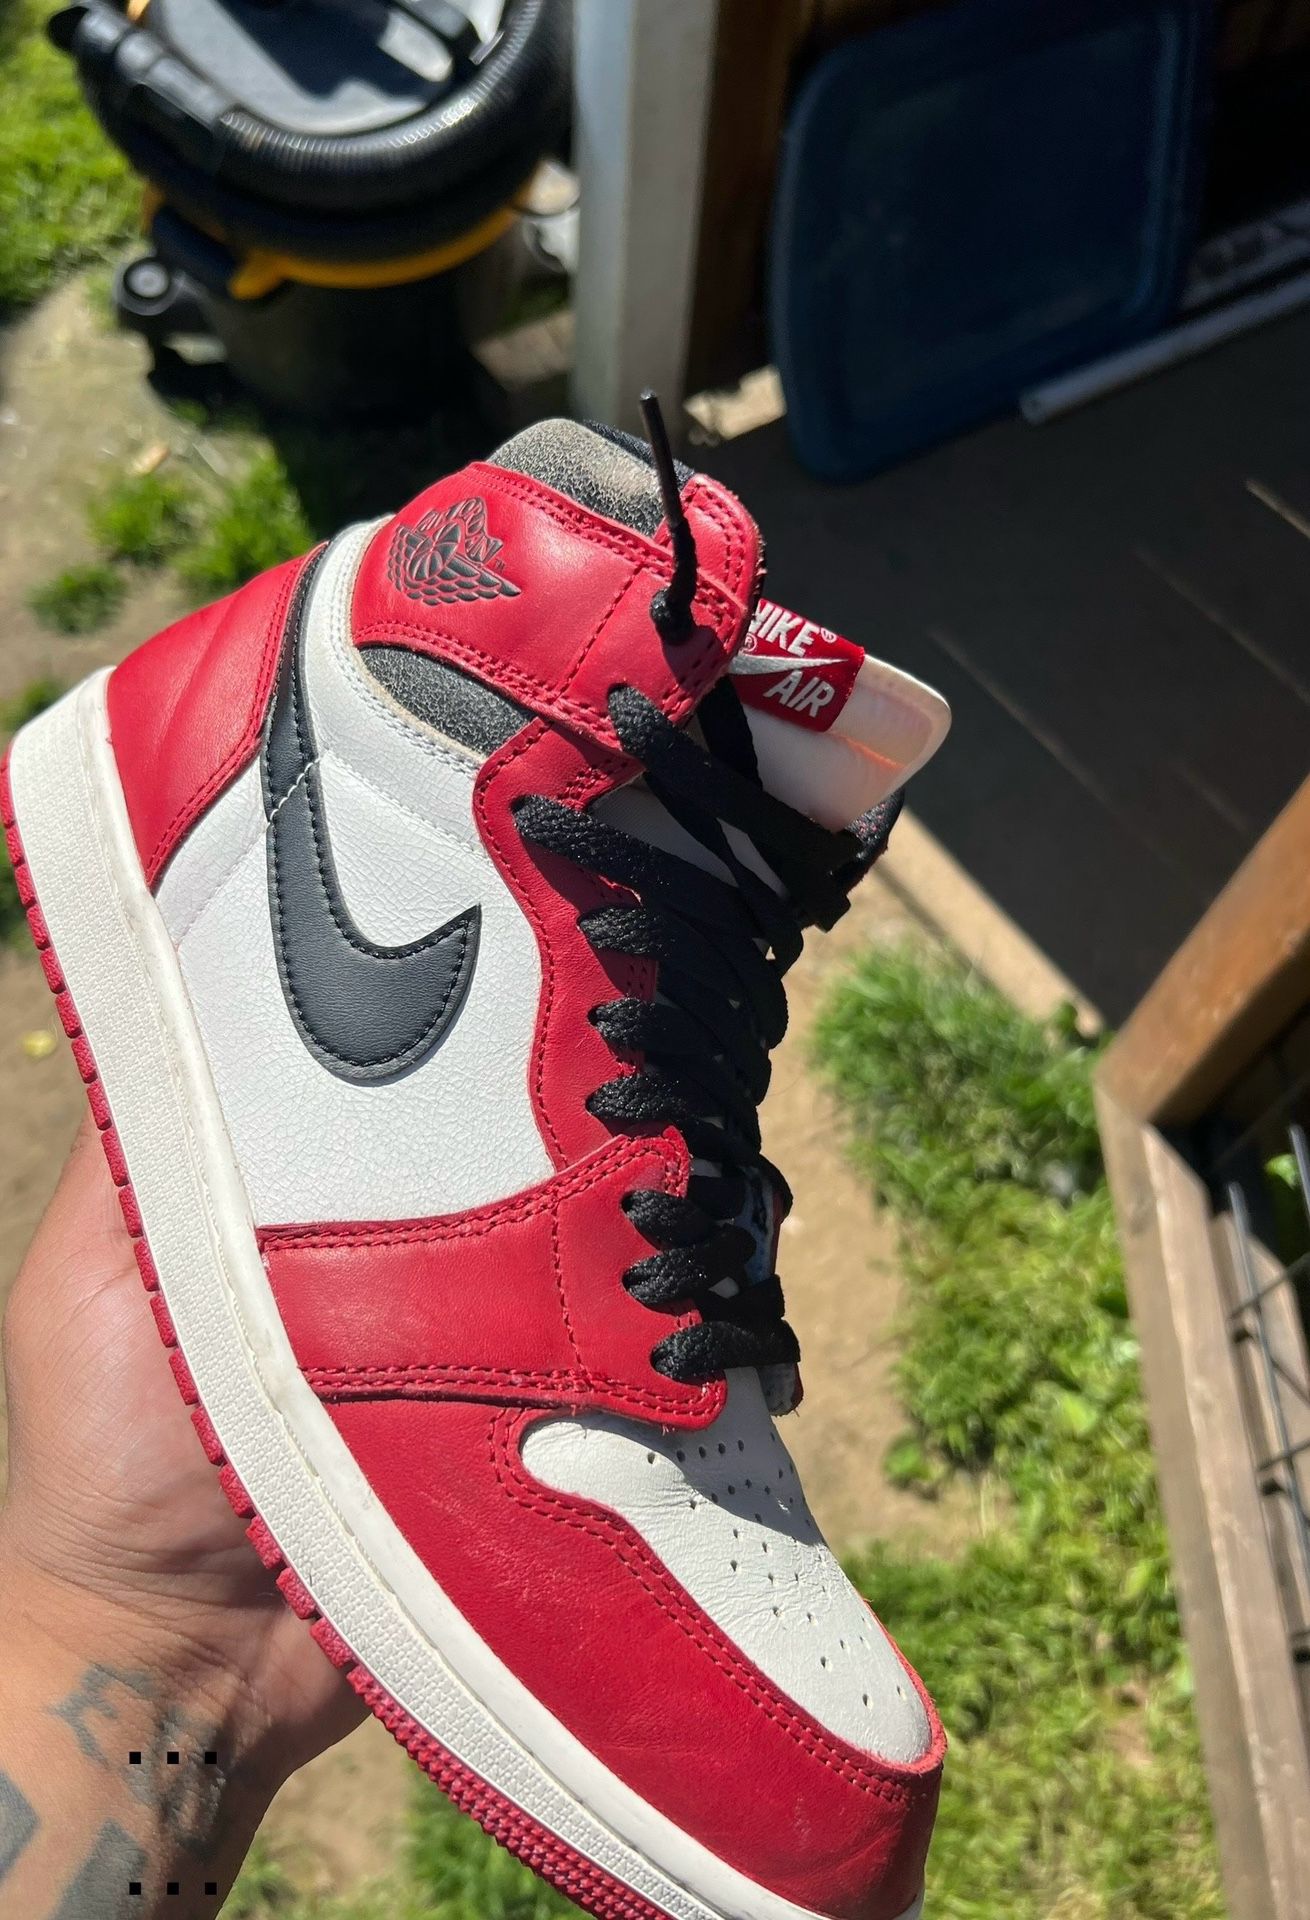 Lost And Founds Jordan 1